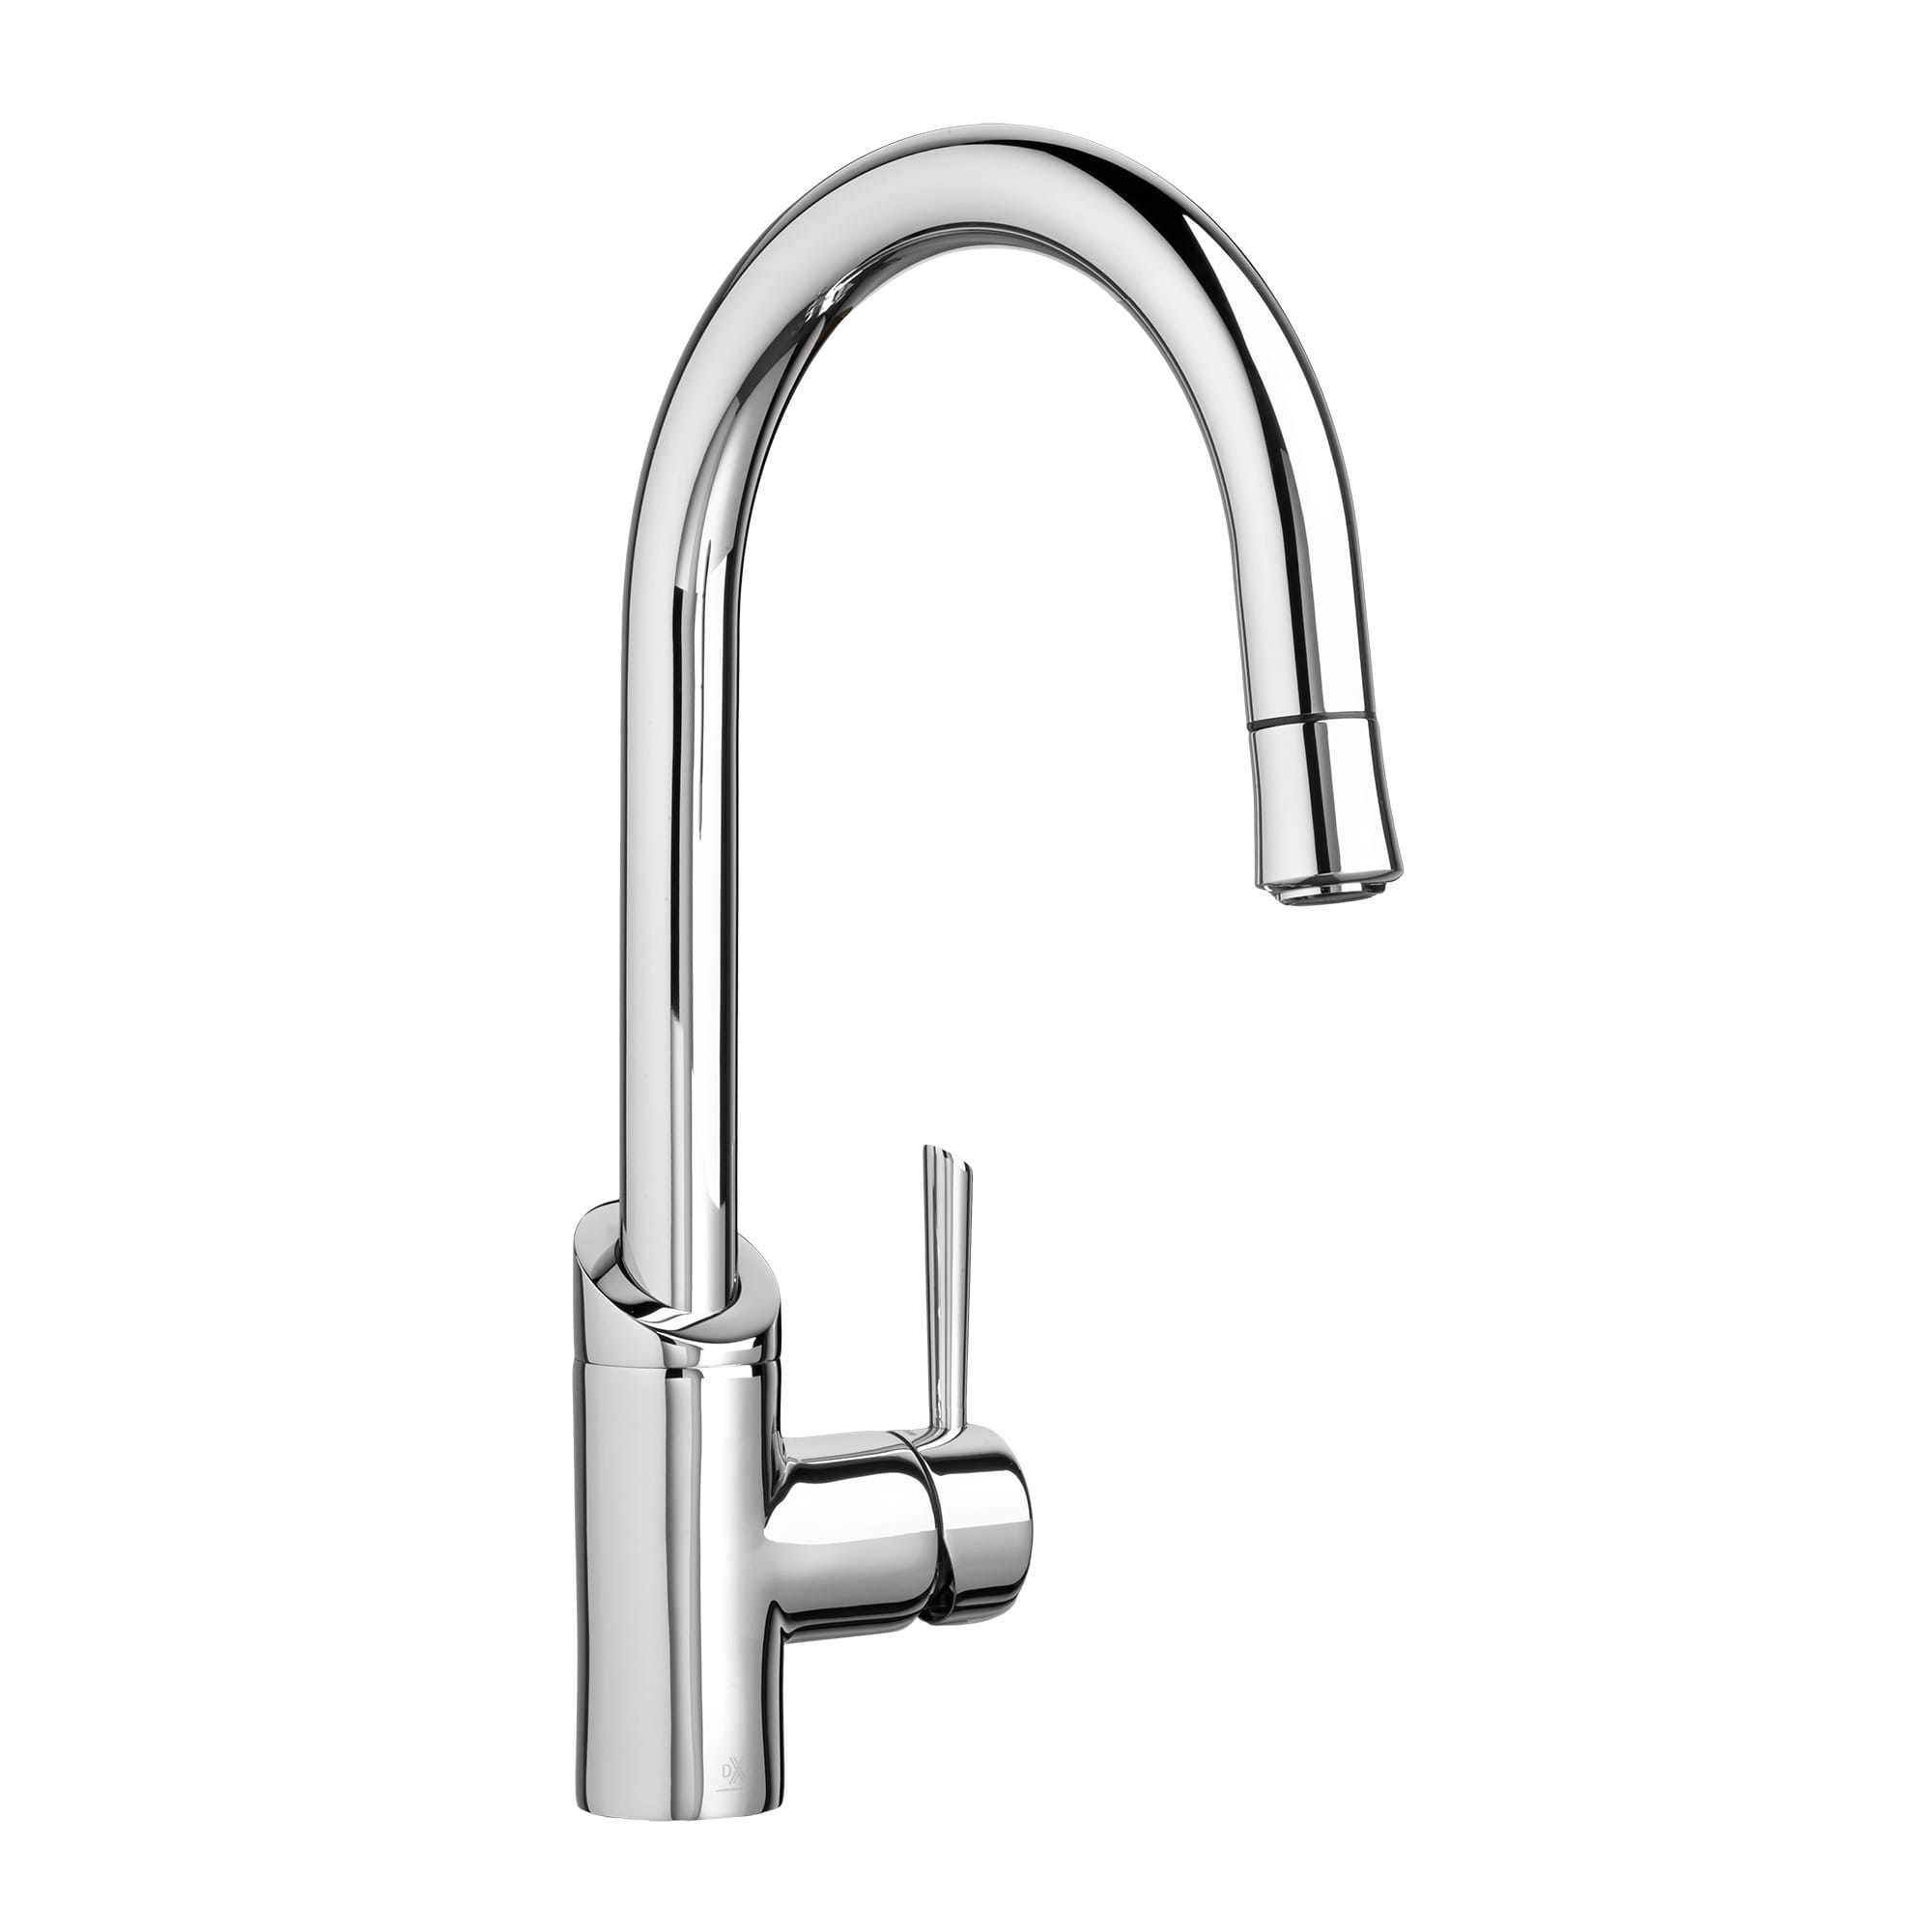 Fresno Single Handle Kitchen Faucet with Lever Handle